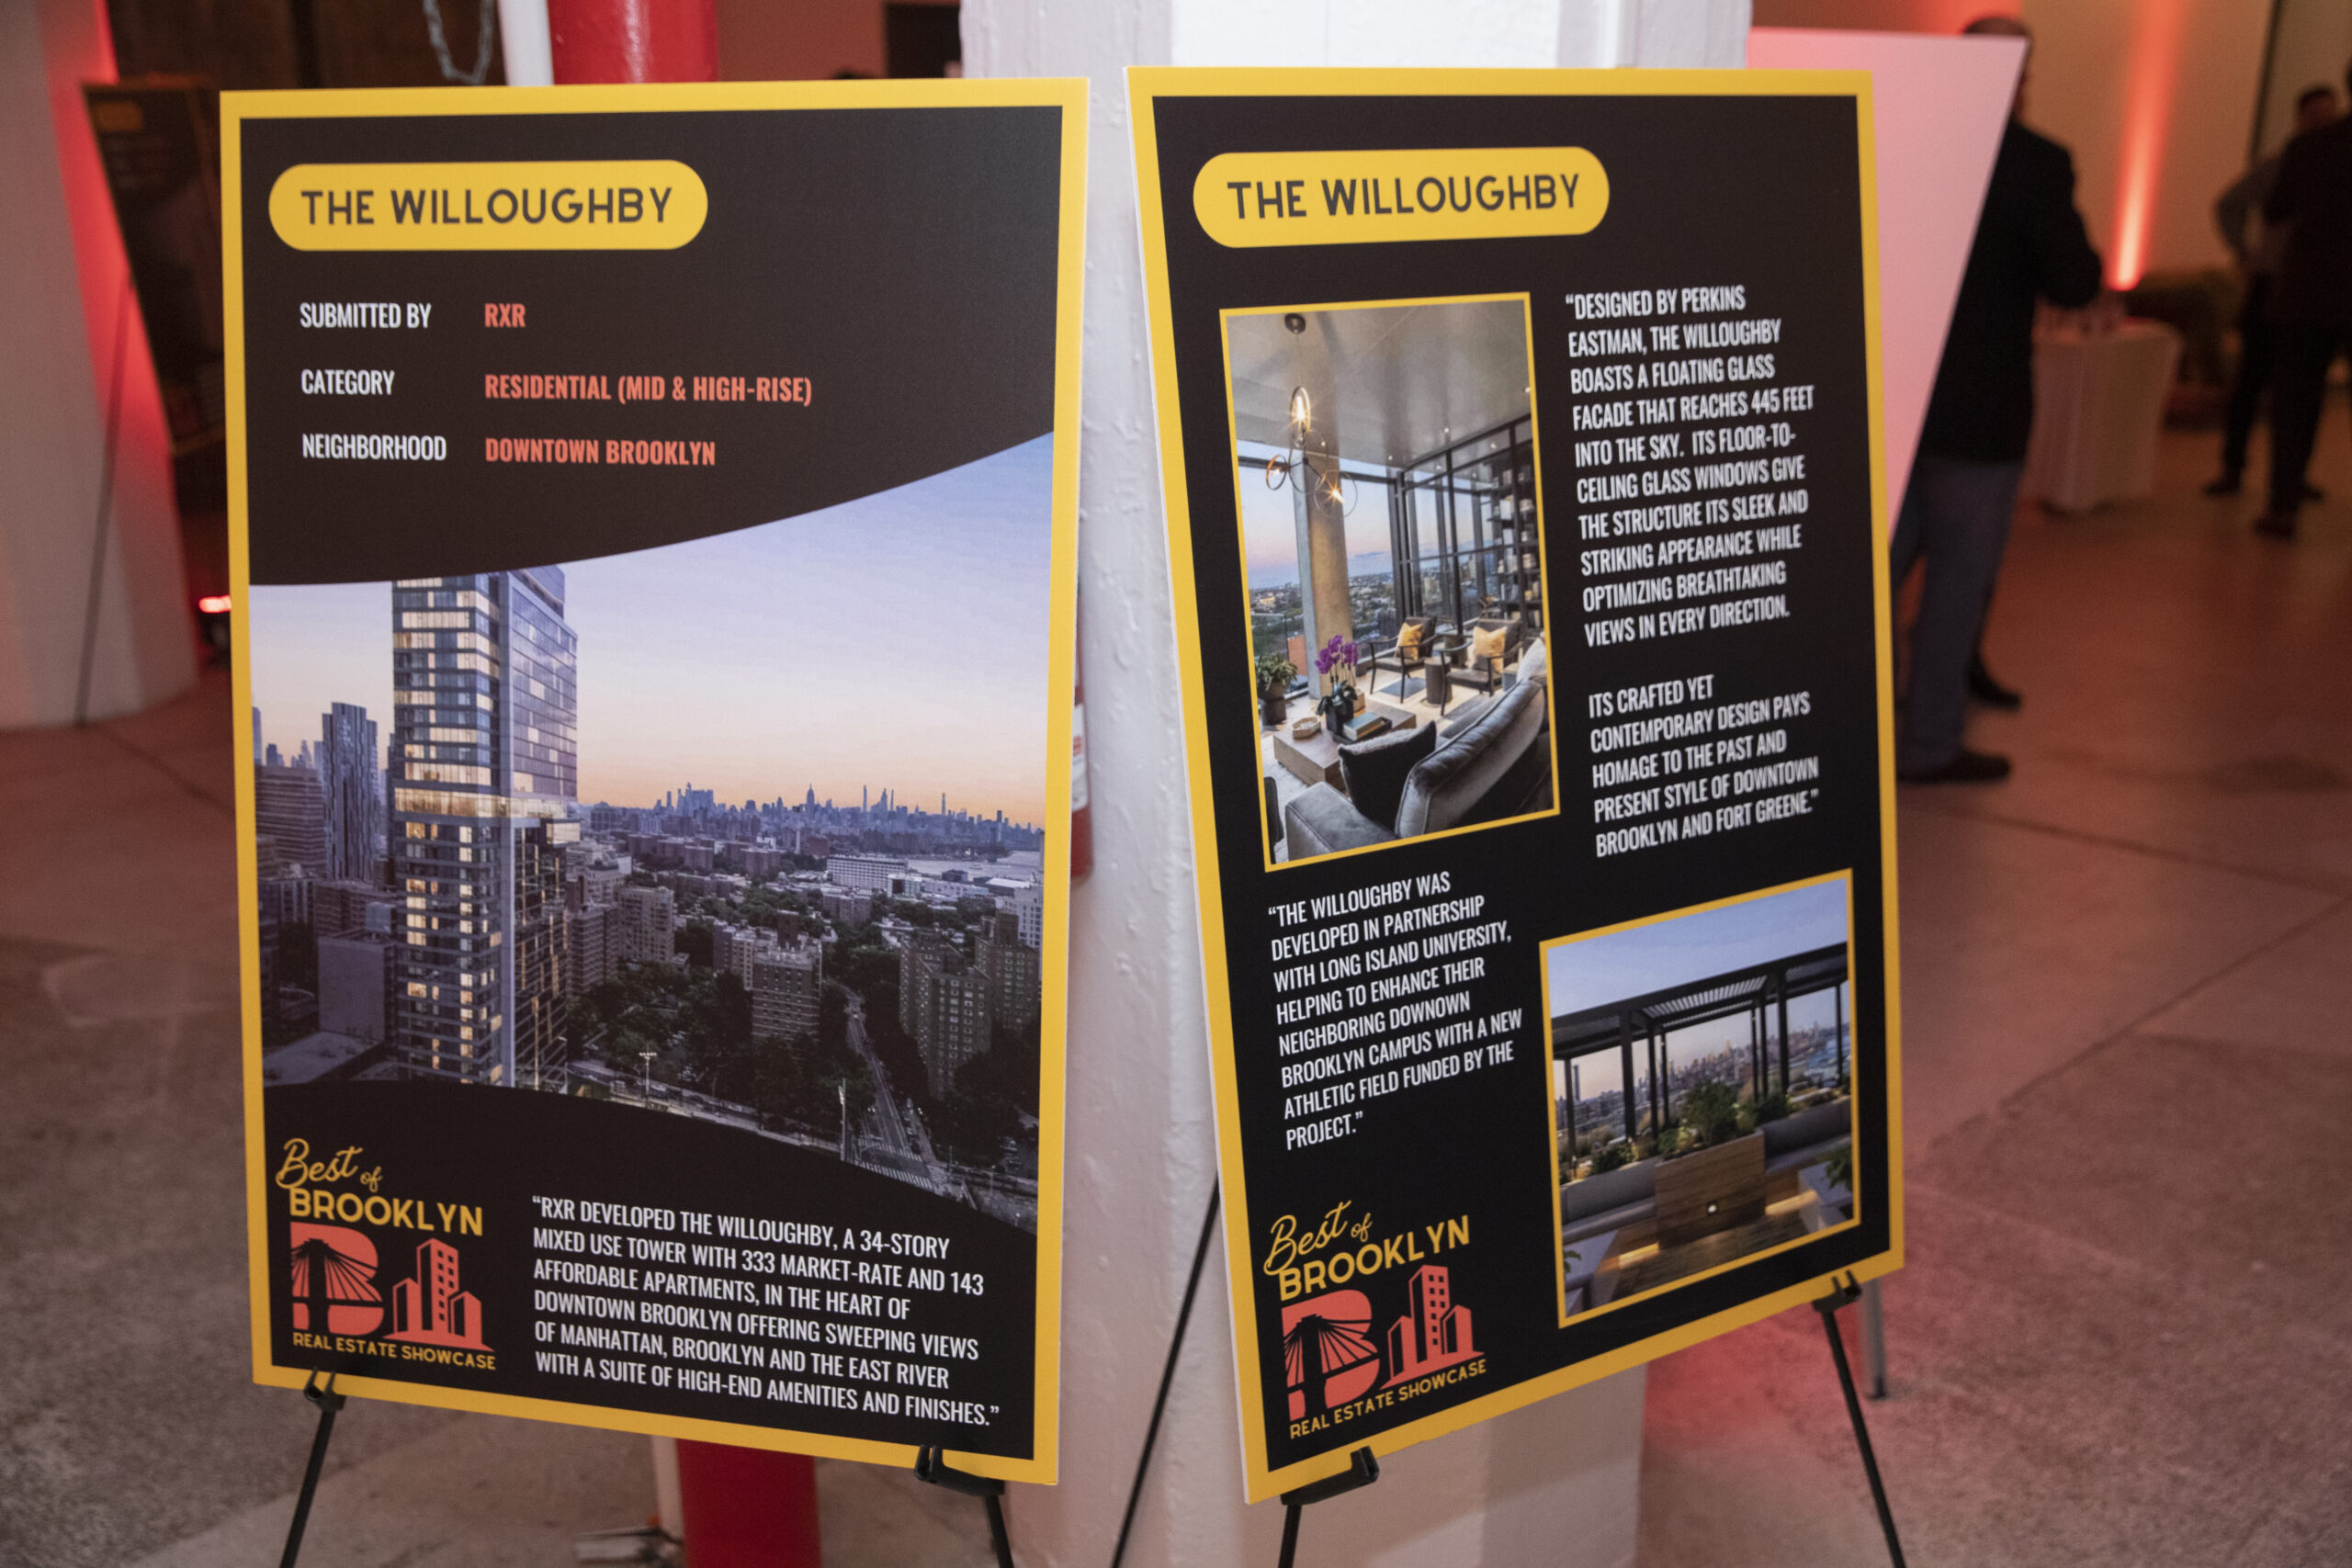 Projects on Display at Best of Brooklyn Real Estate Showcase.